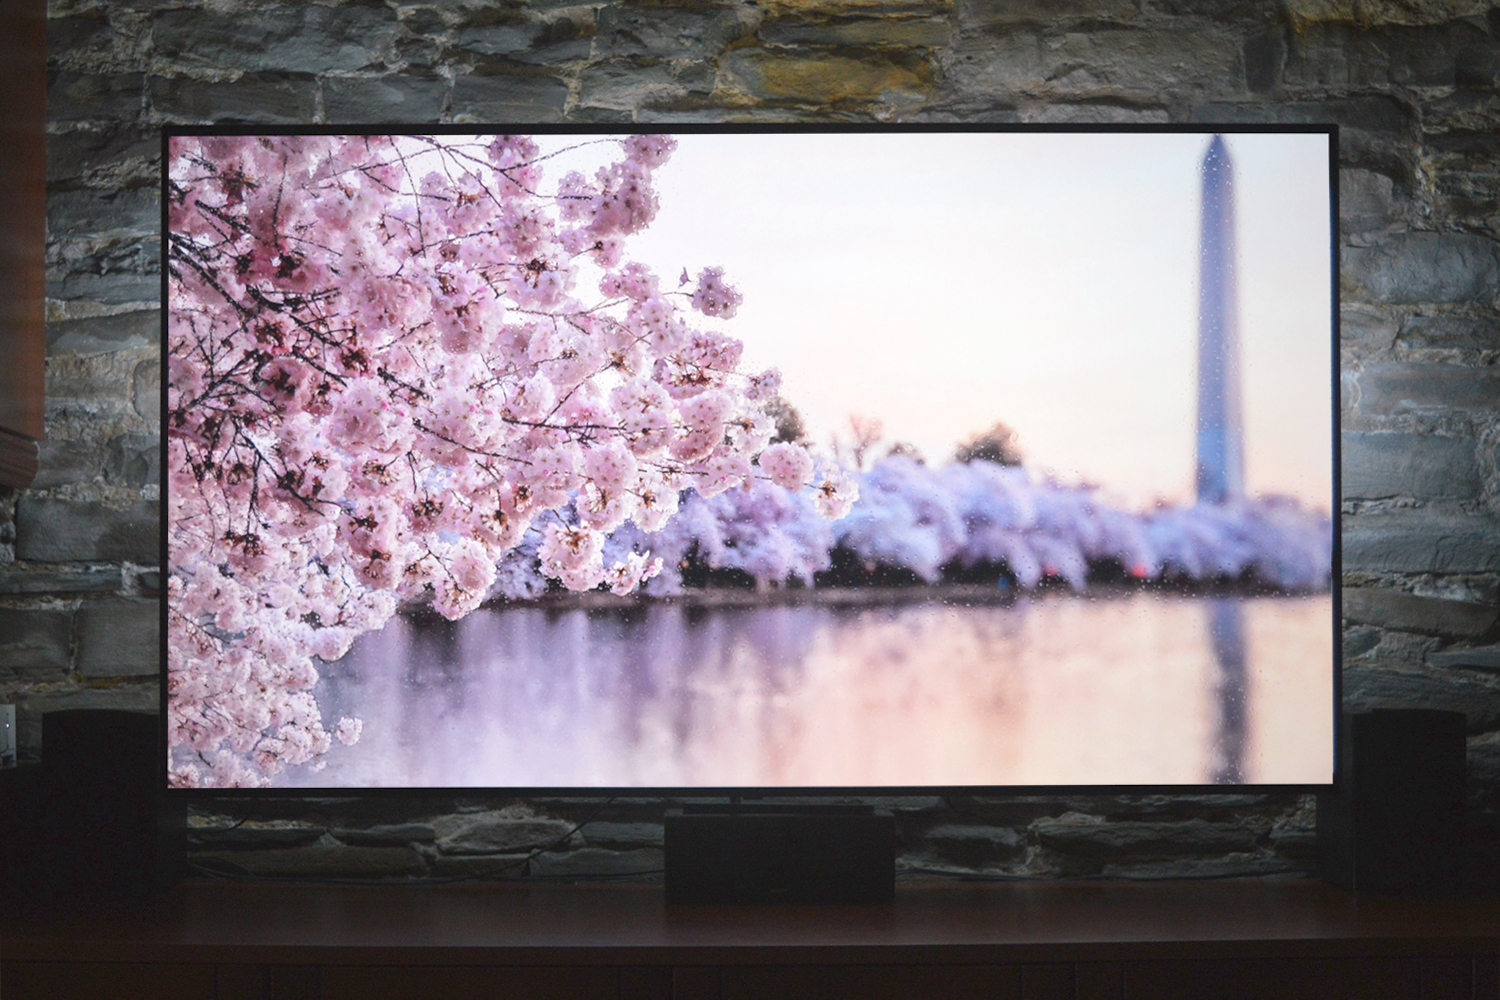 What is bias lighting and how can it improve TV performance? | Digital  Trends